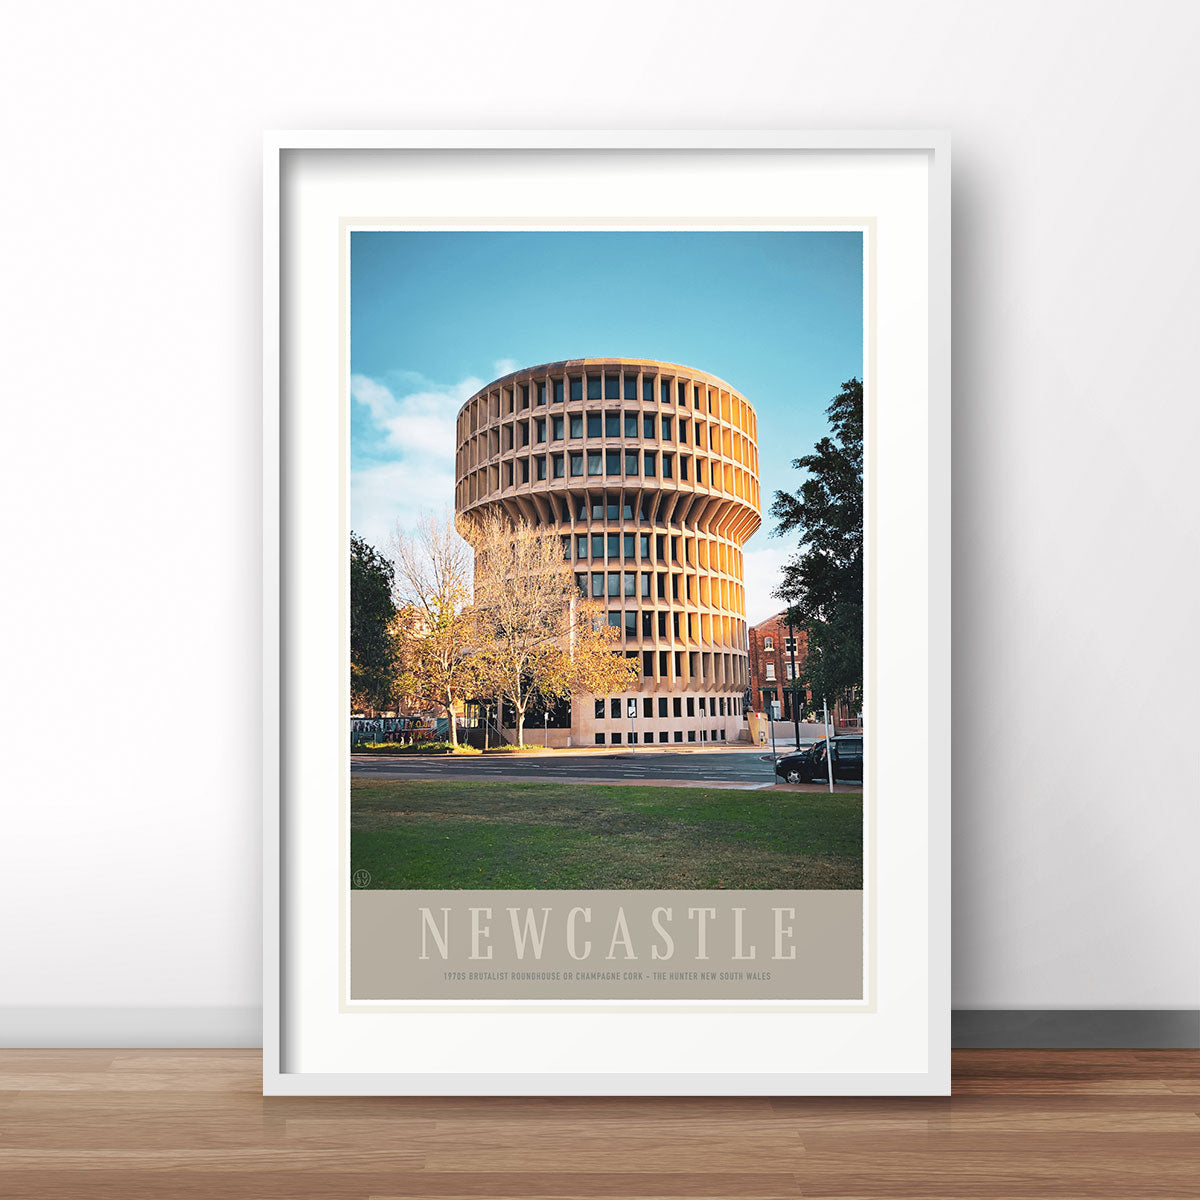 Newcastle NSW vintage retro travel poster from Places We Luv